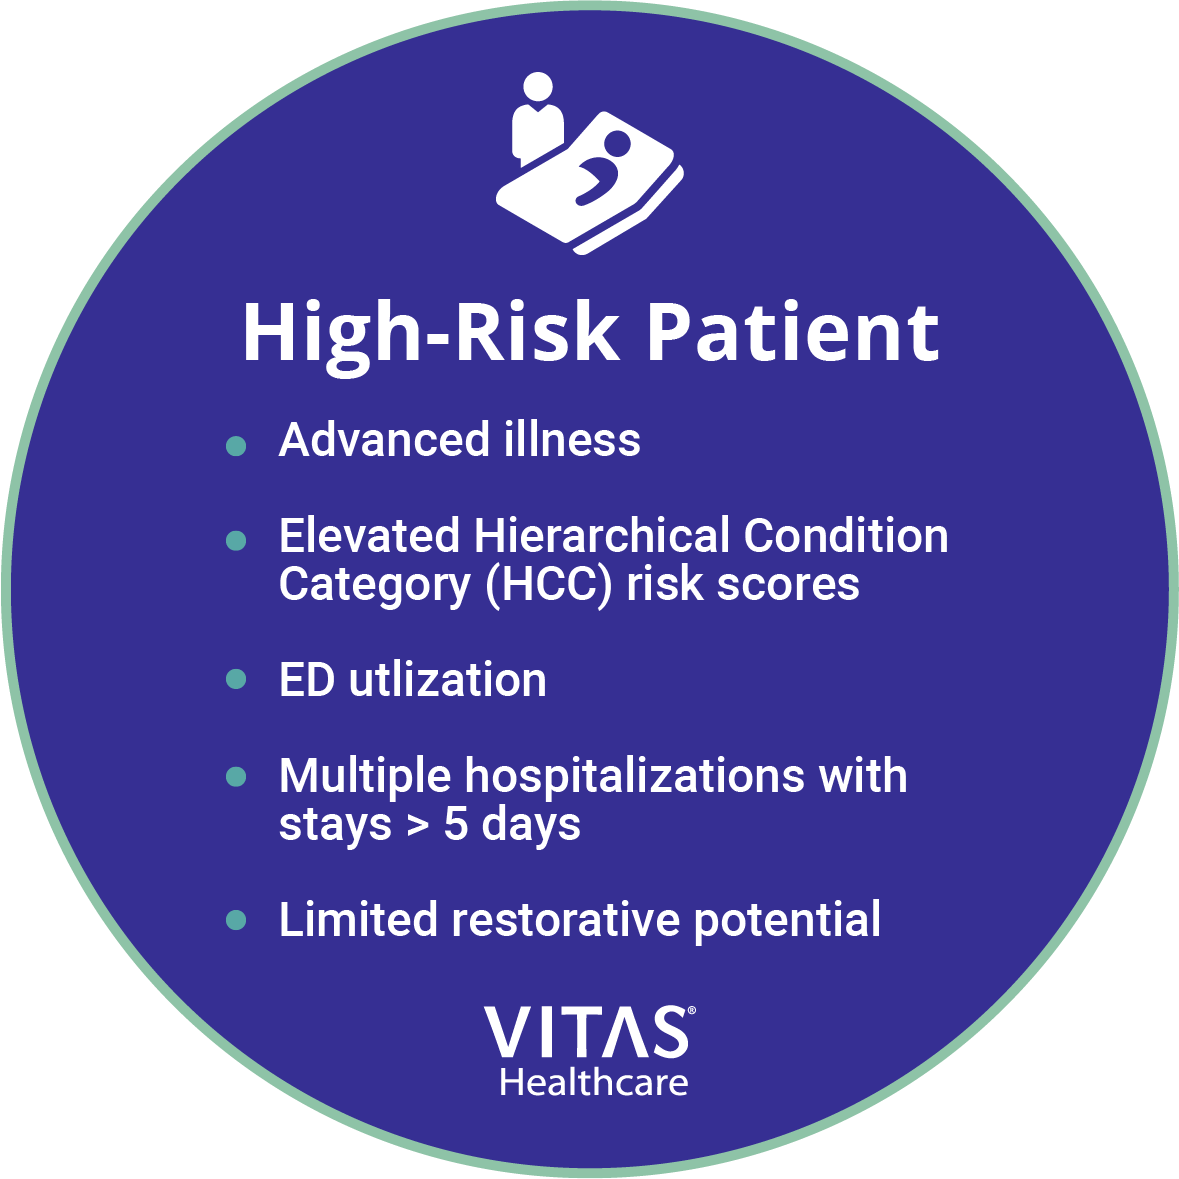 Five percent of patients require intensive care management, 15 to 35 percent need chronic disease management, and 60 to 89 percent require prevention and access.